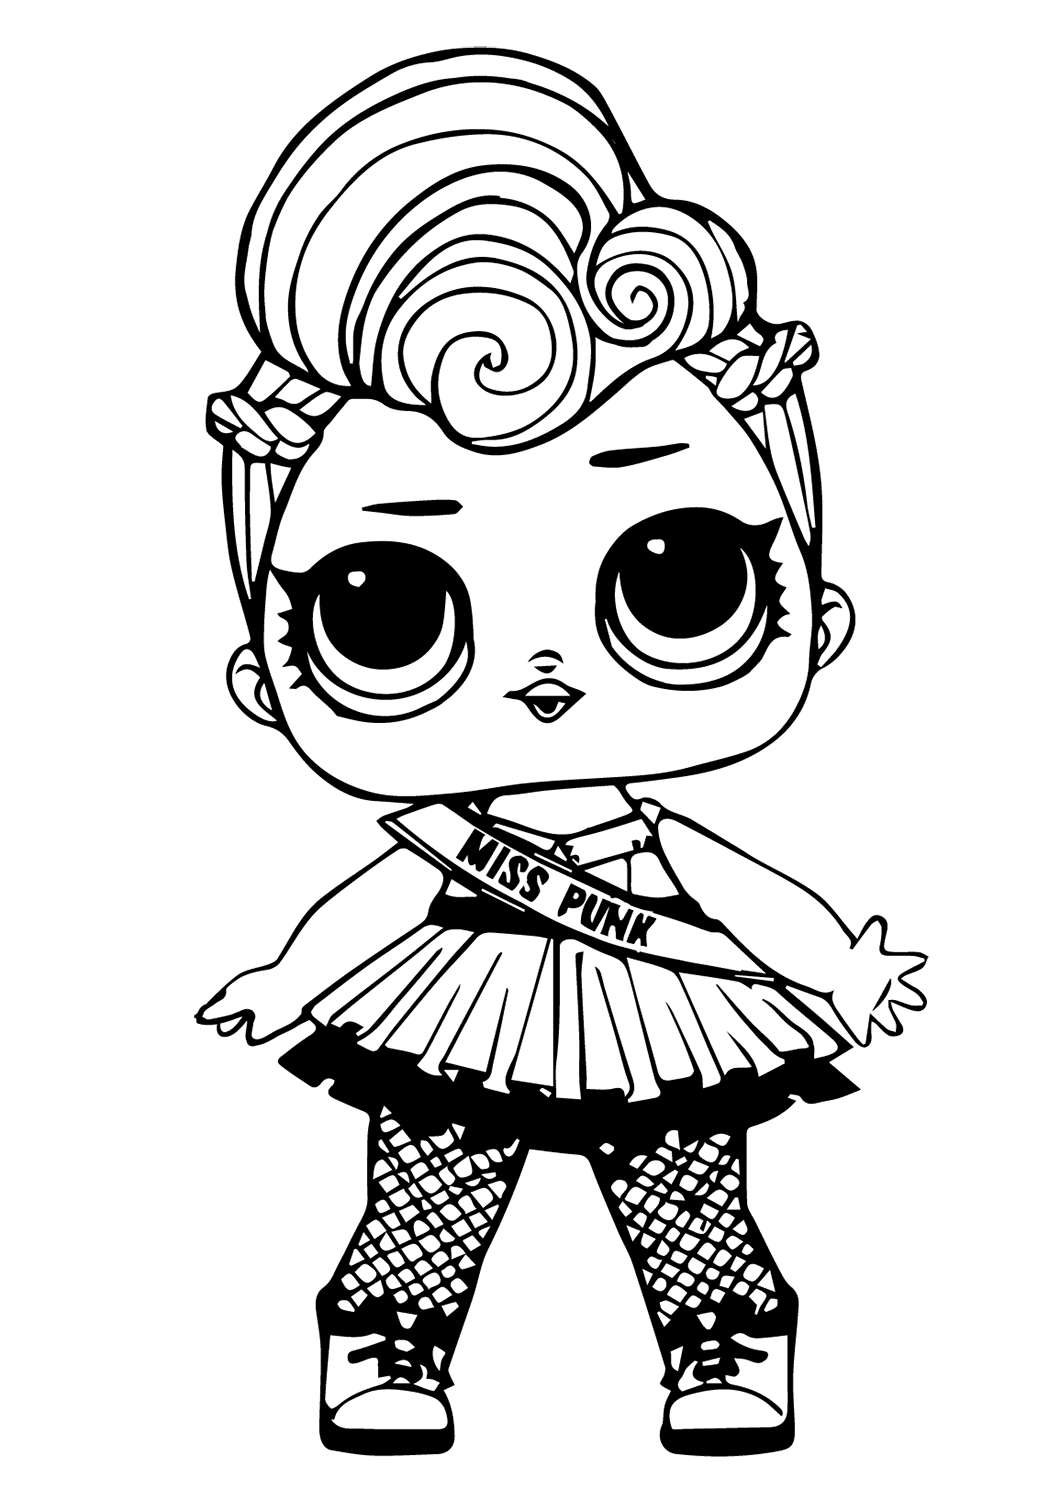 1572656430_lol-doll-miss-punk-coloring-page